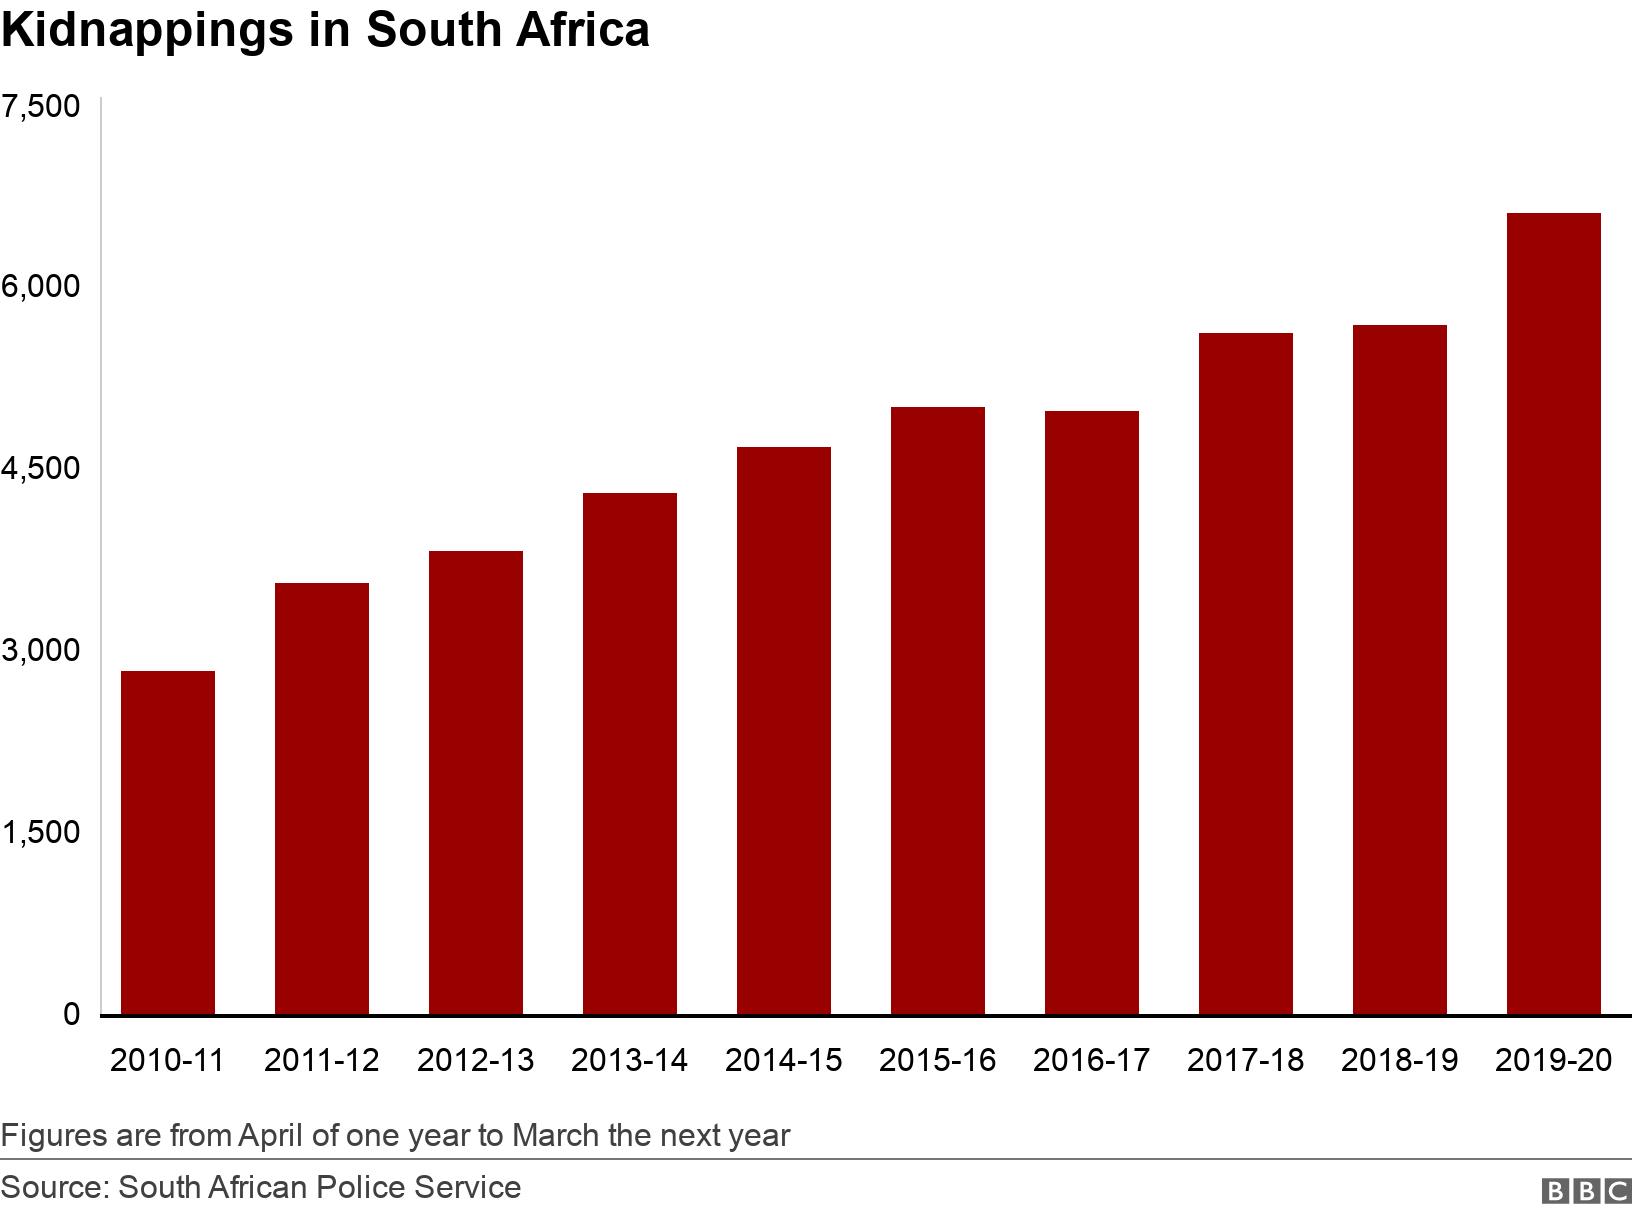 Kidnappings in South Africa. .  Figures are from April of one year to March the next year.